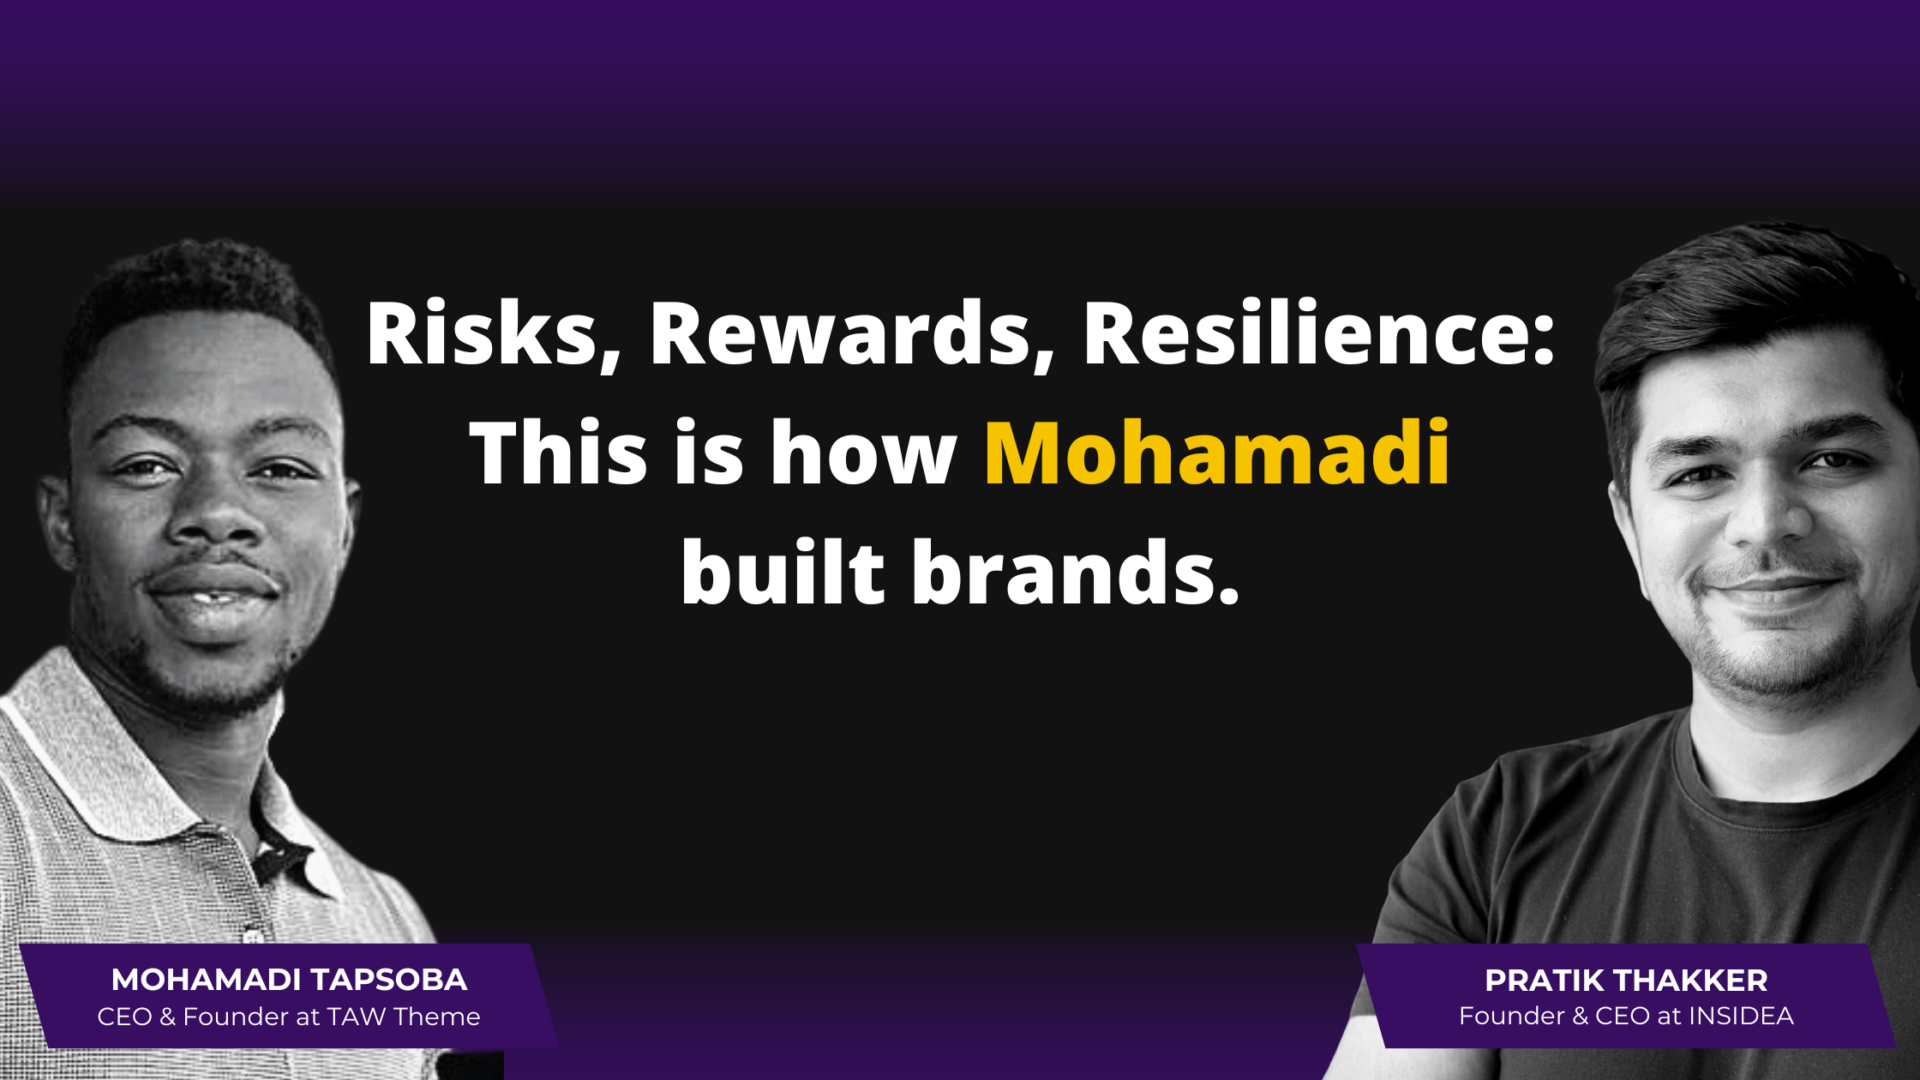 Risks, Rewards, and Resilience: This is how Mohamadi built brands.